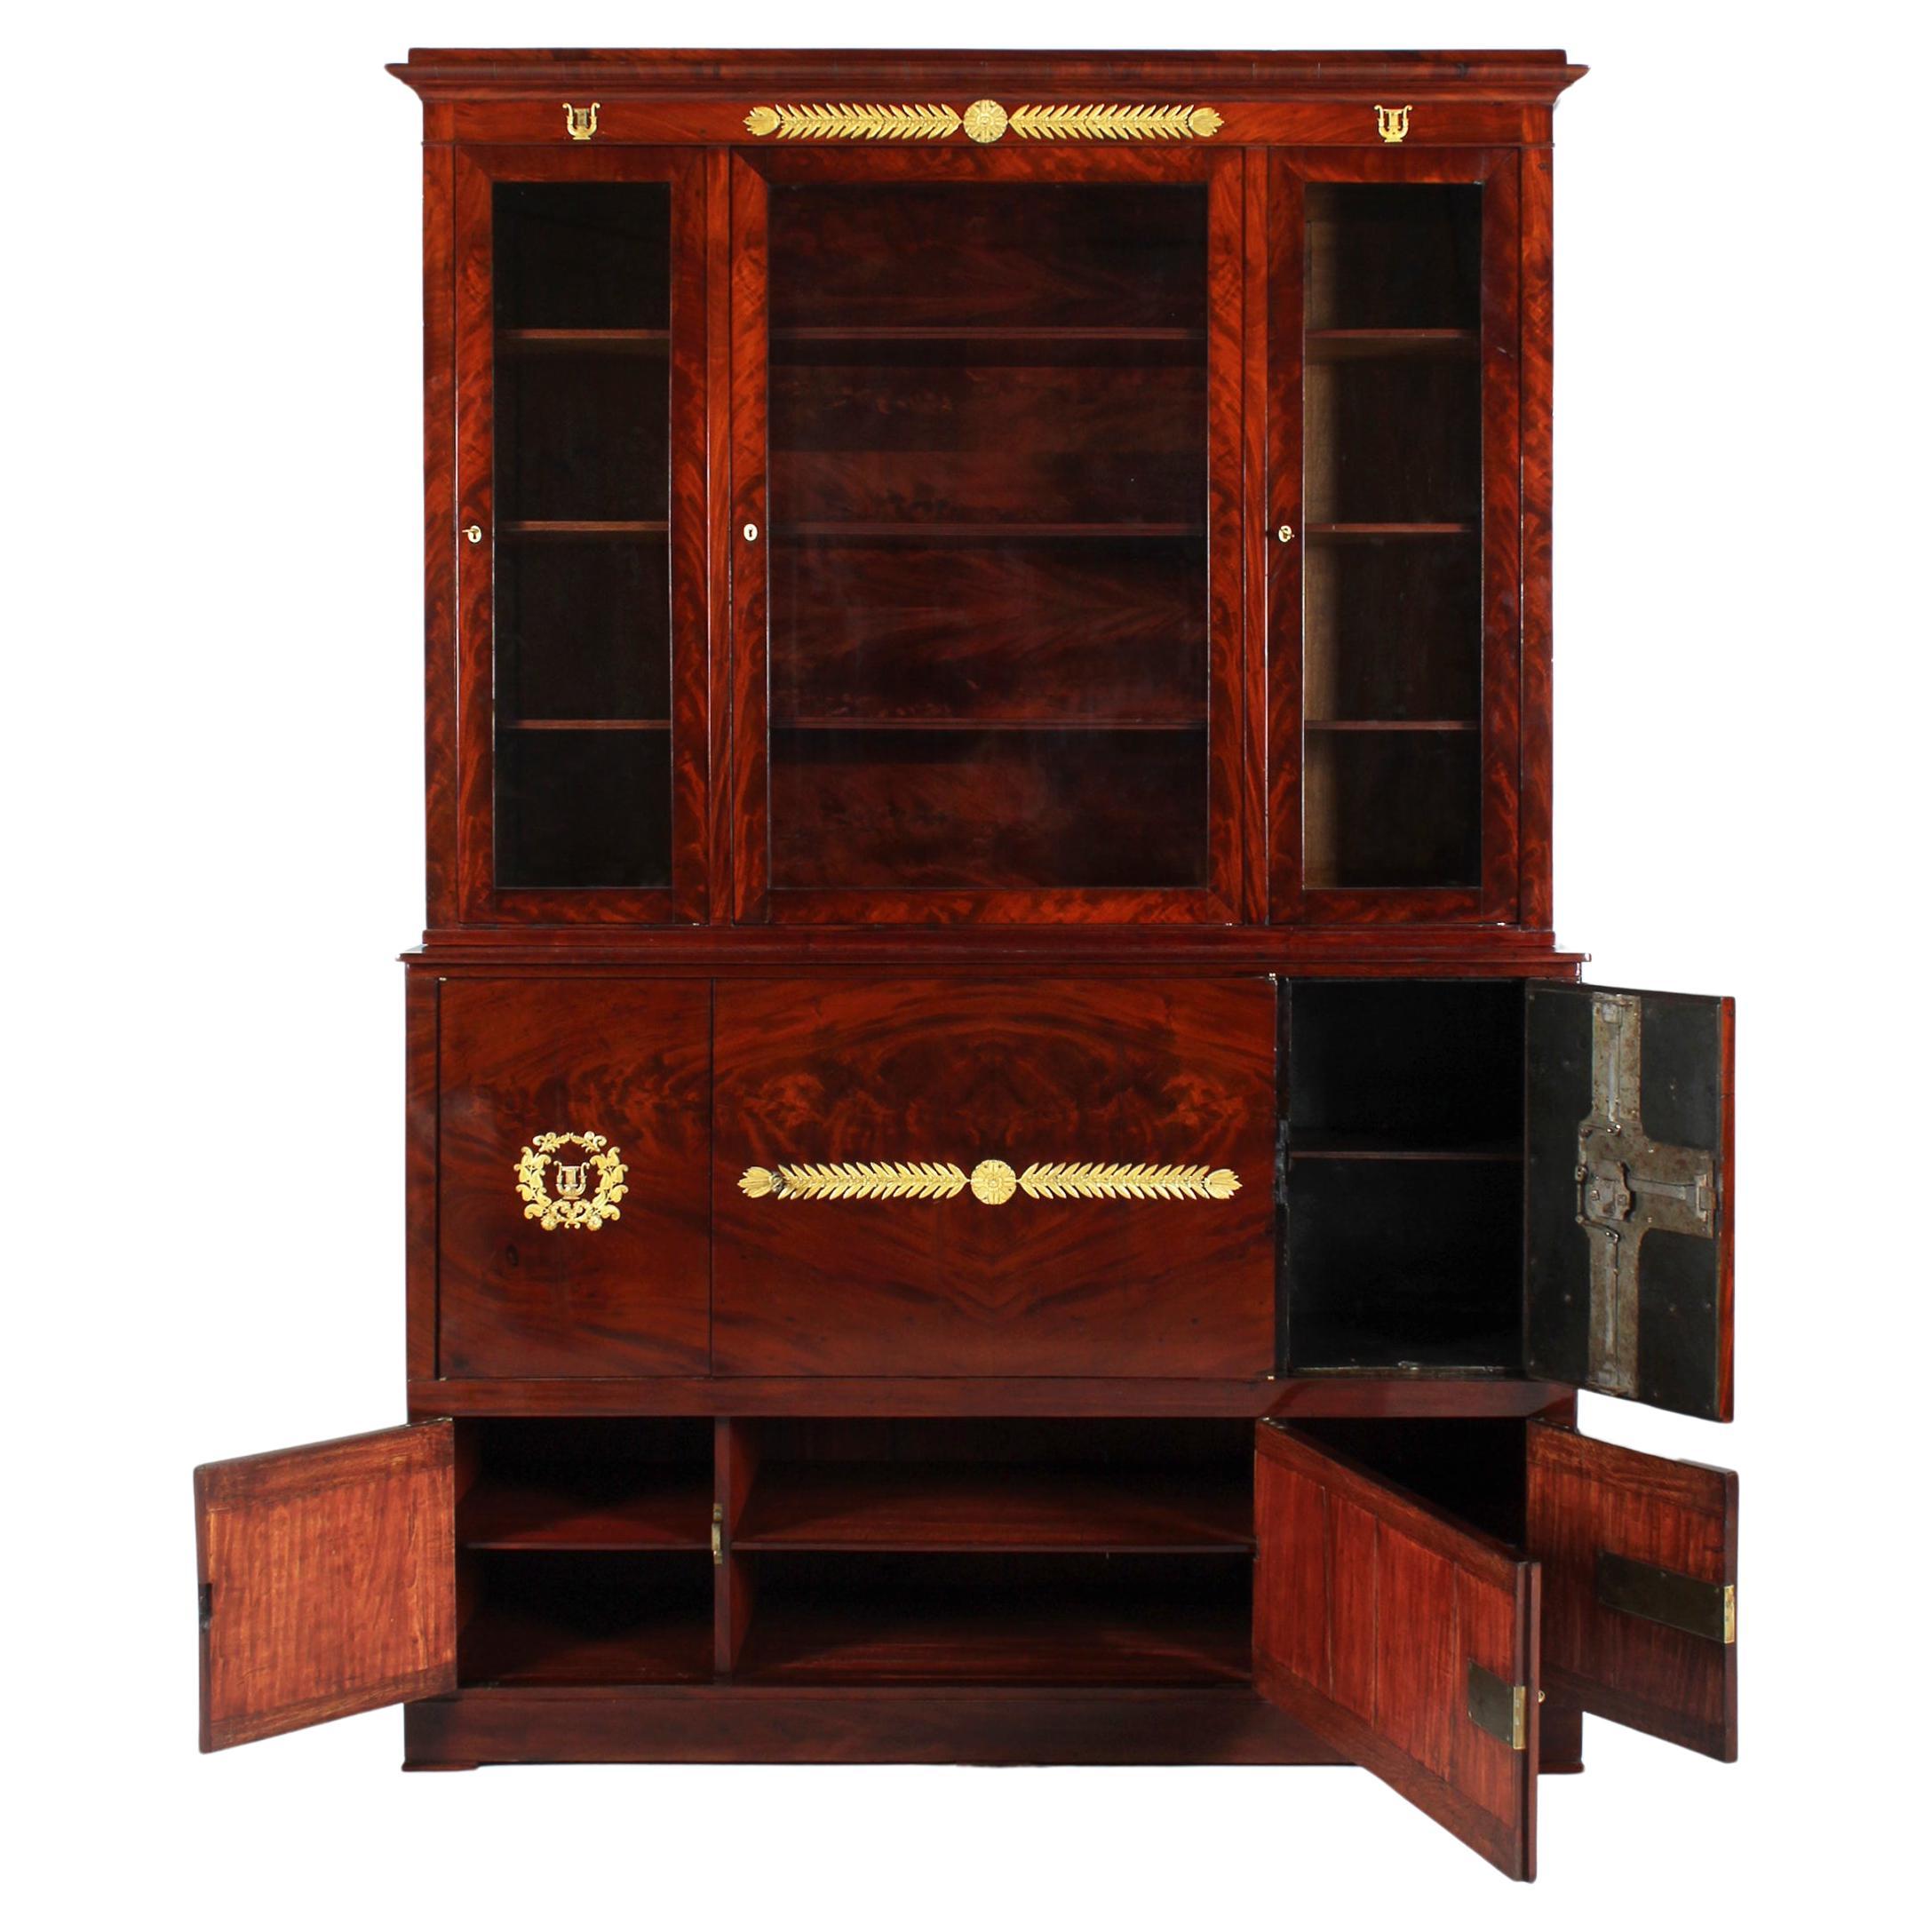 Early 19th Century French Empire Bookcase with Safe-Deposit-Box, Mahogany For Sale